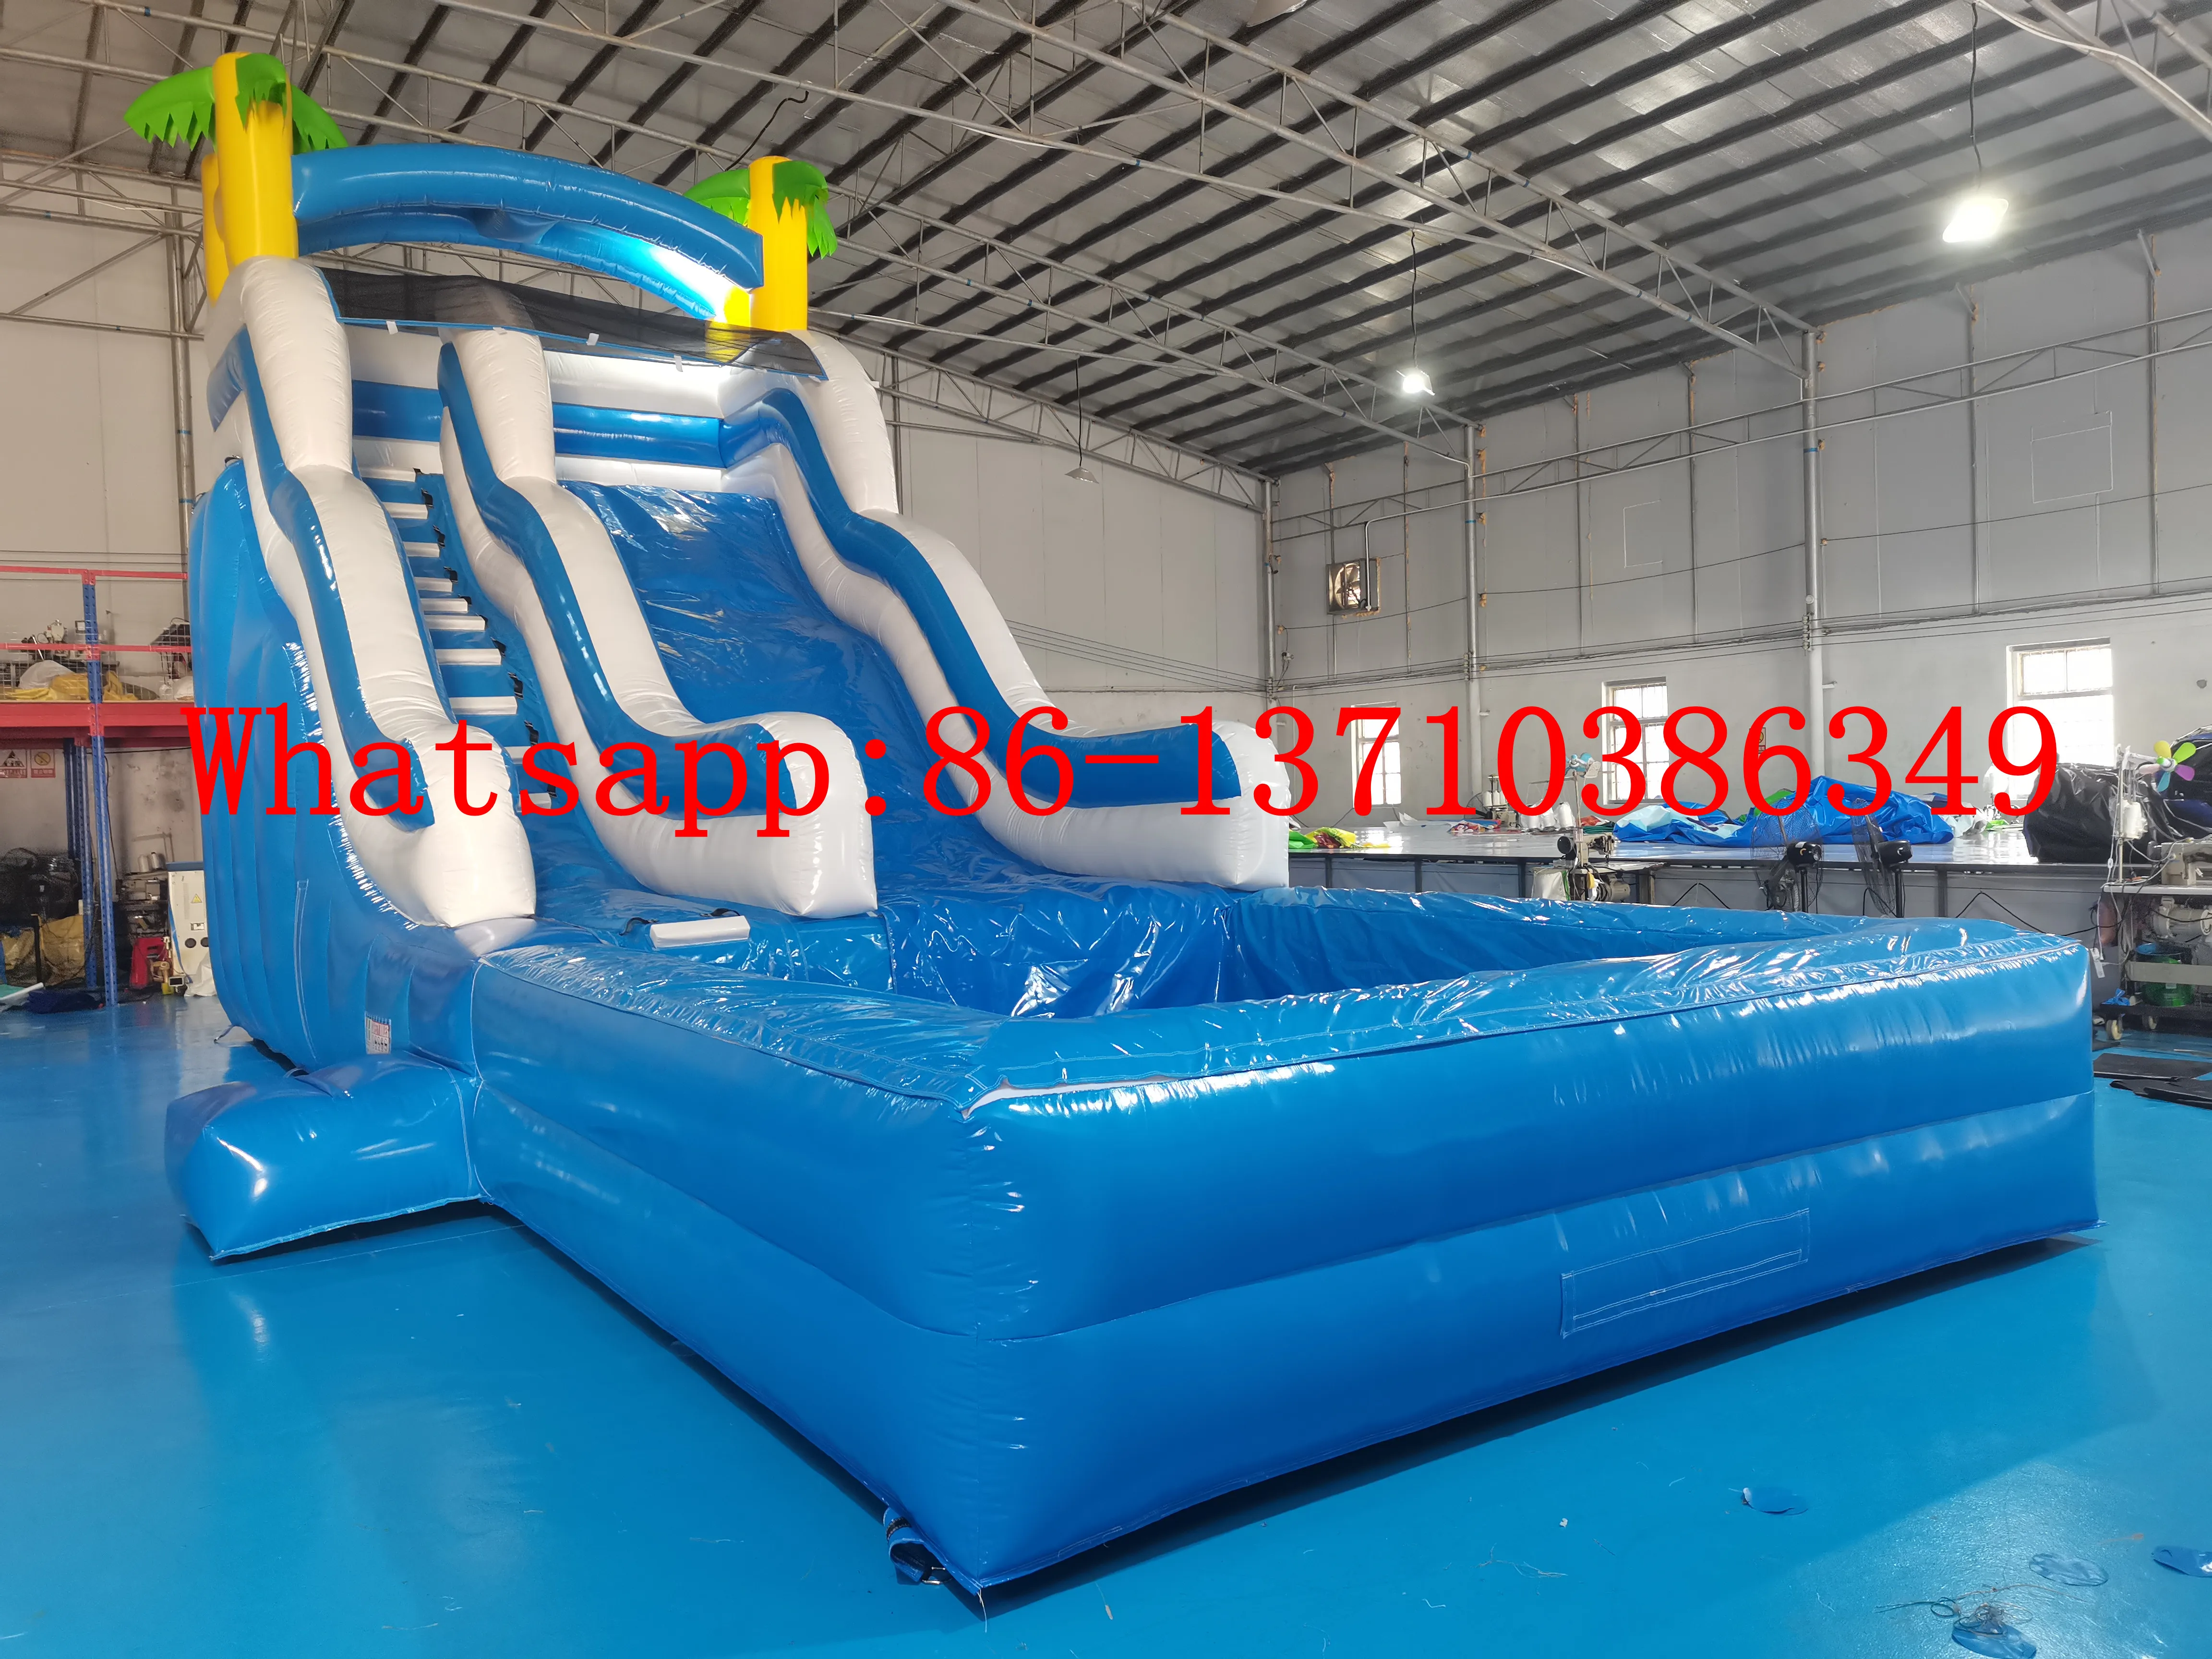 

Commercial Rental Coconut Inflatable Pool Slide Combo for Sale